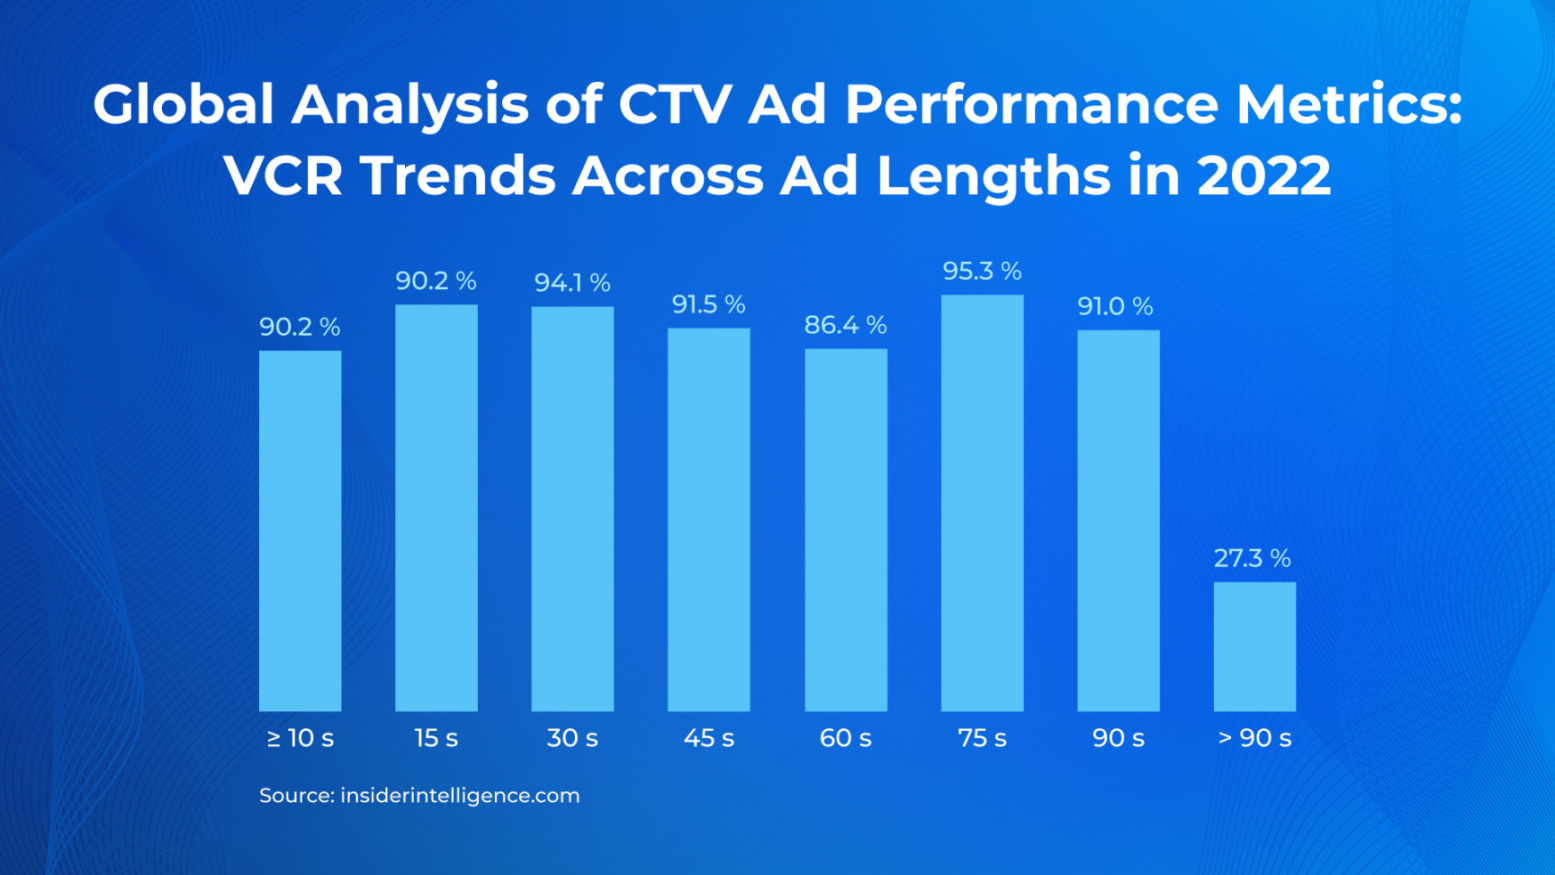 Global Analysis of CTV Ad Performance Metrics: VCR Trends Across Ad Lengths in 2022